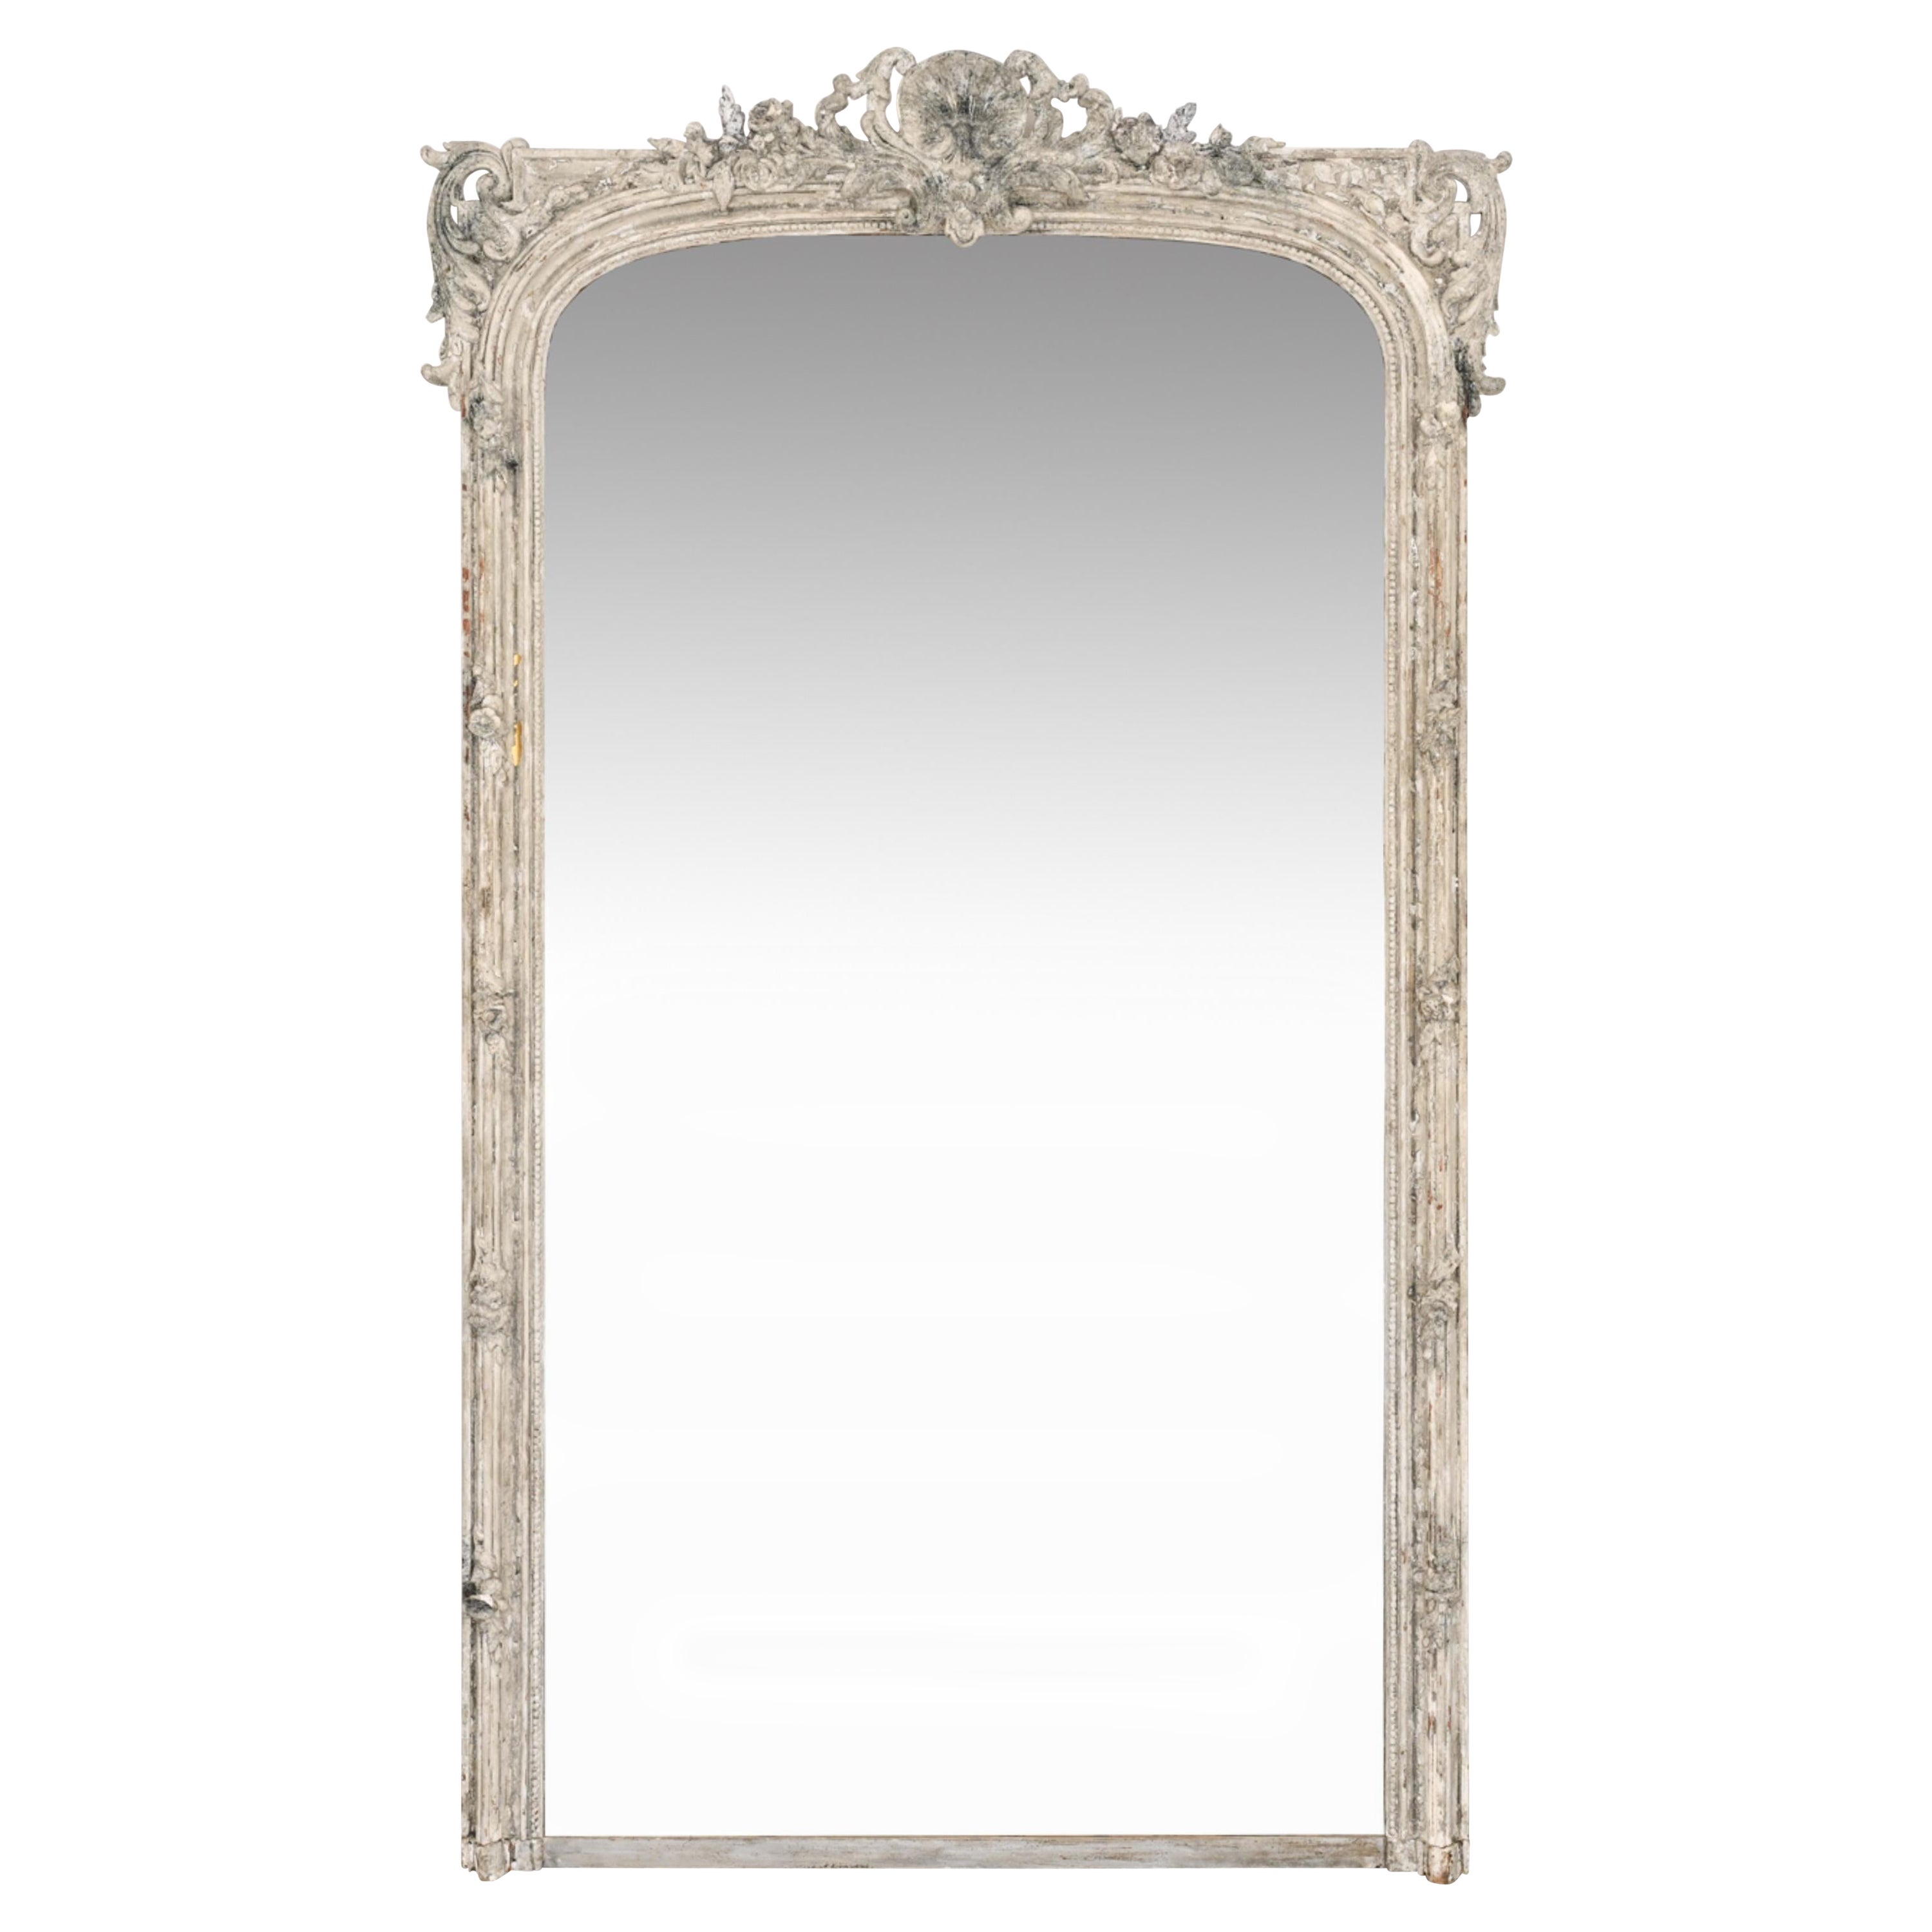 Oversize 19th C. Carved and Painted Mirror